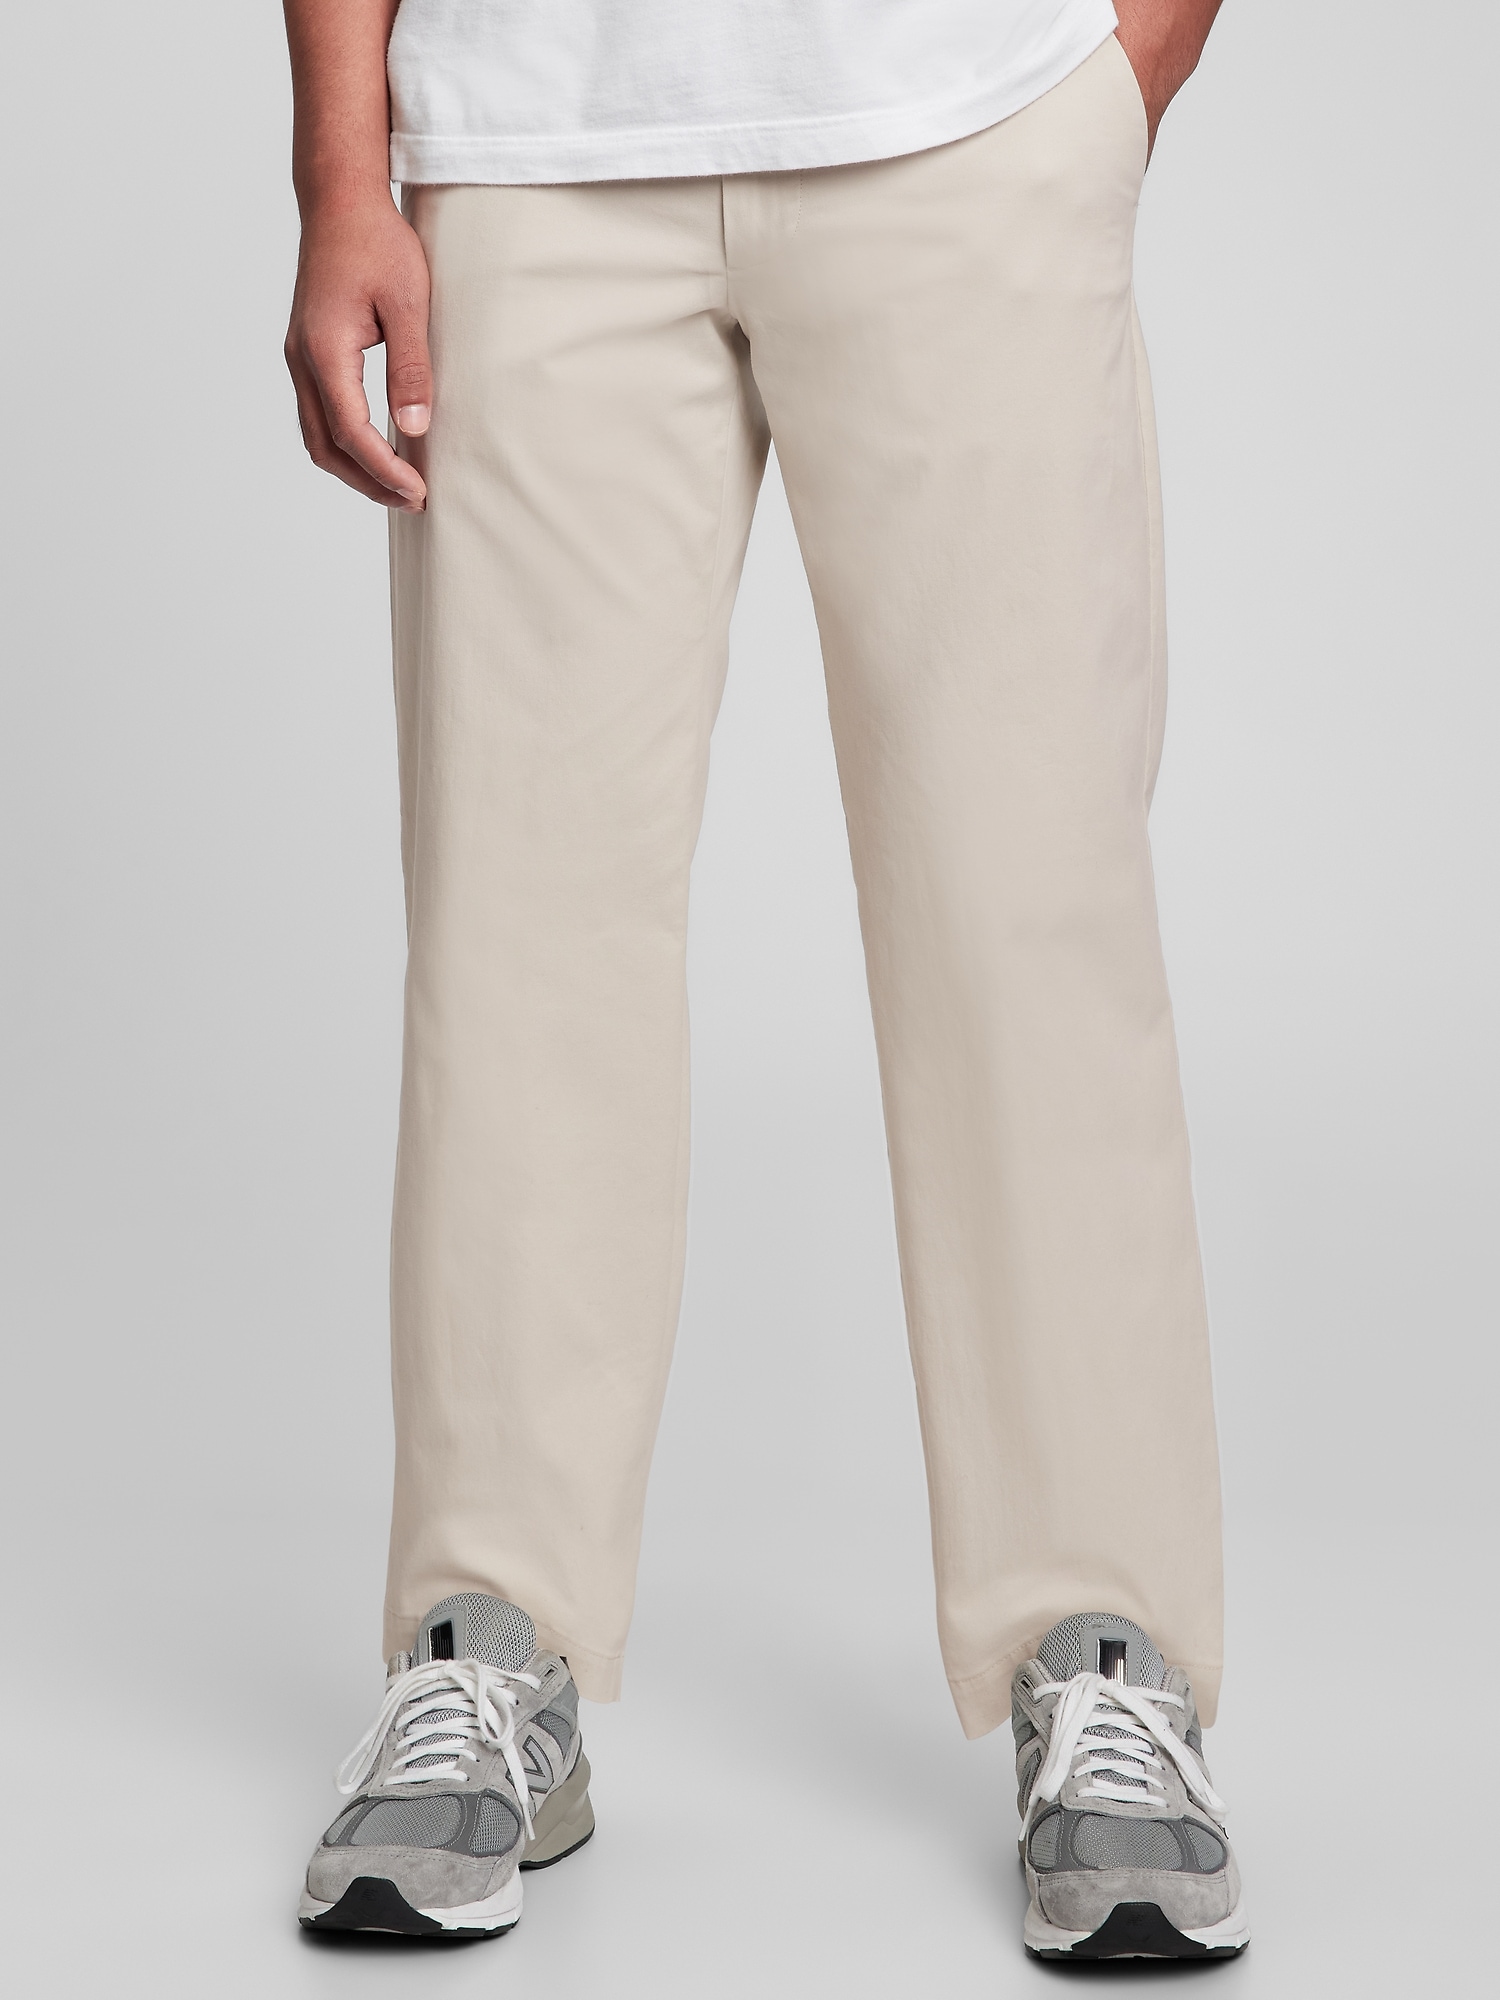 Gap Modern Khakis In Relaxed Fit With Flex In Sandstone Beige